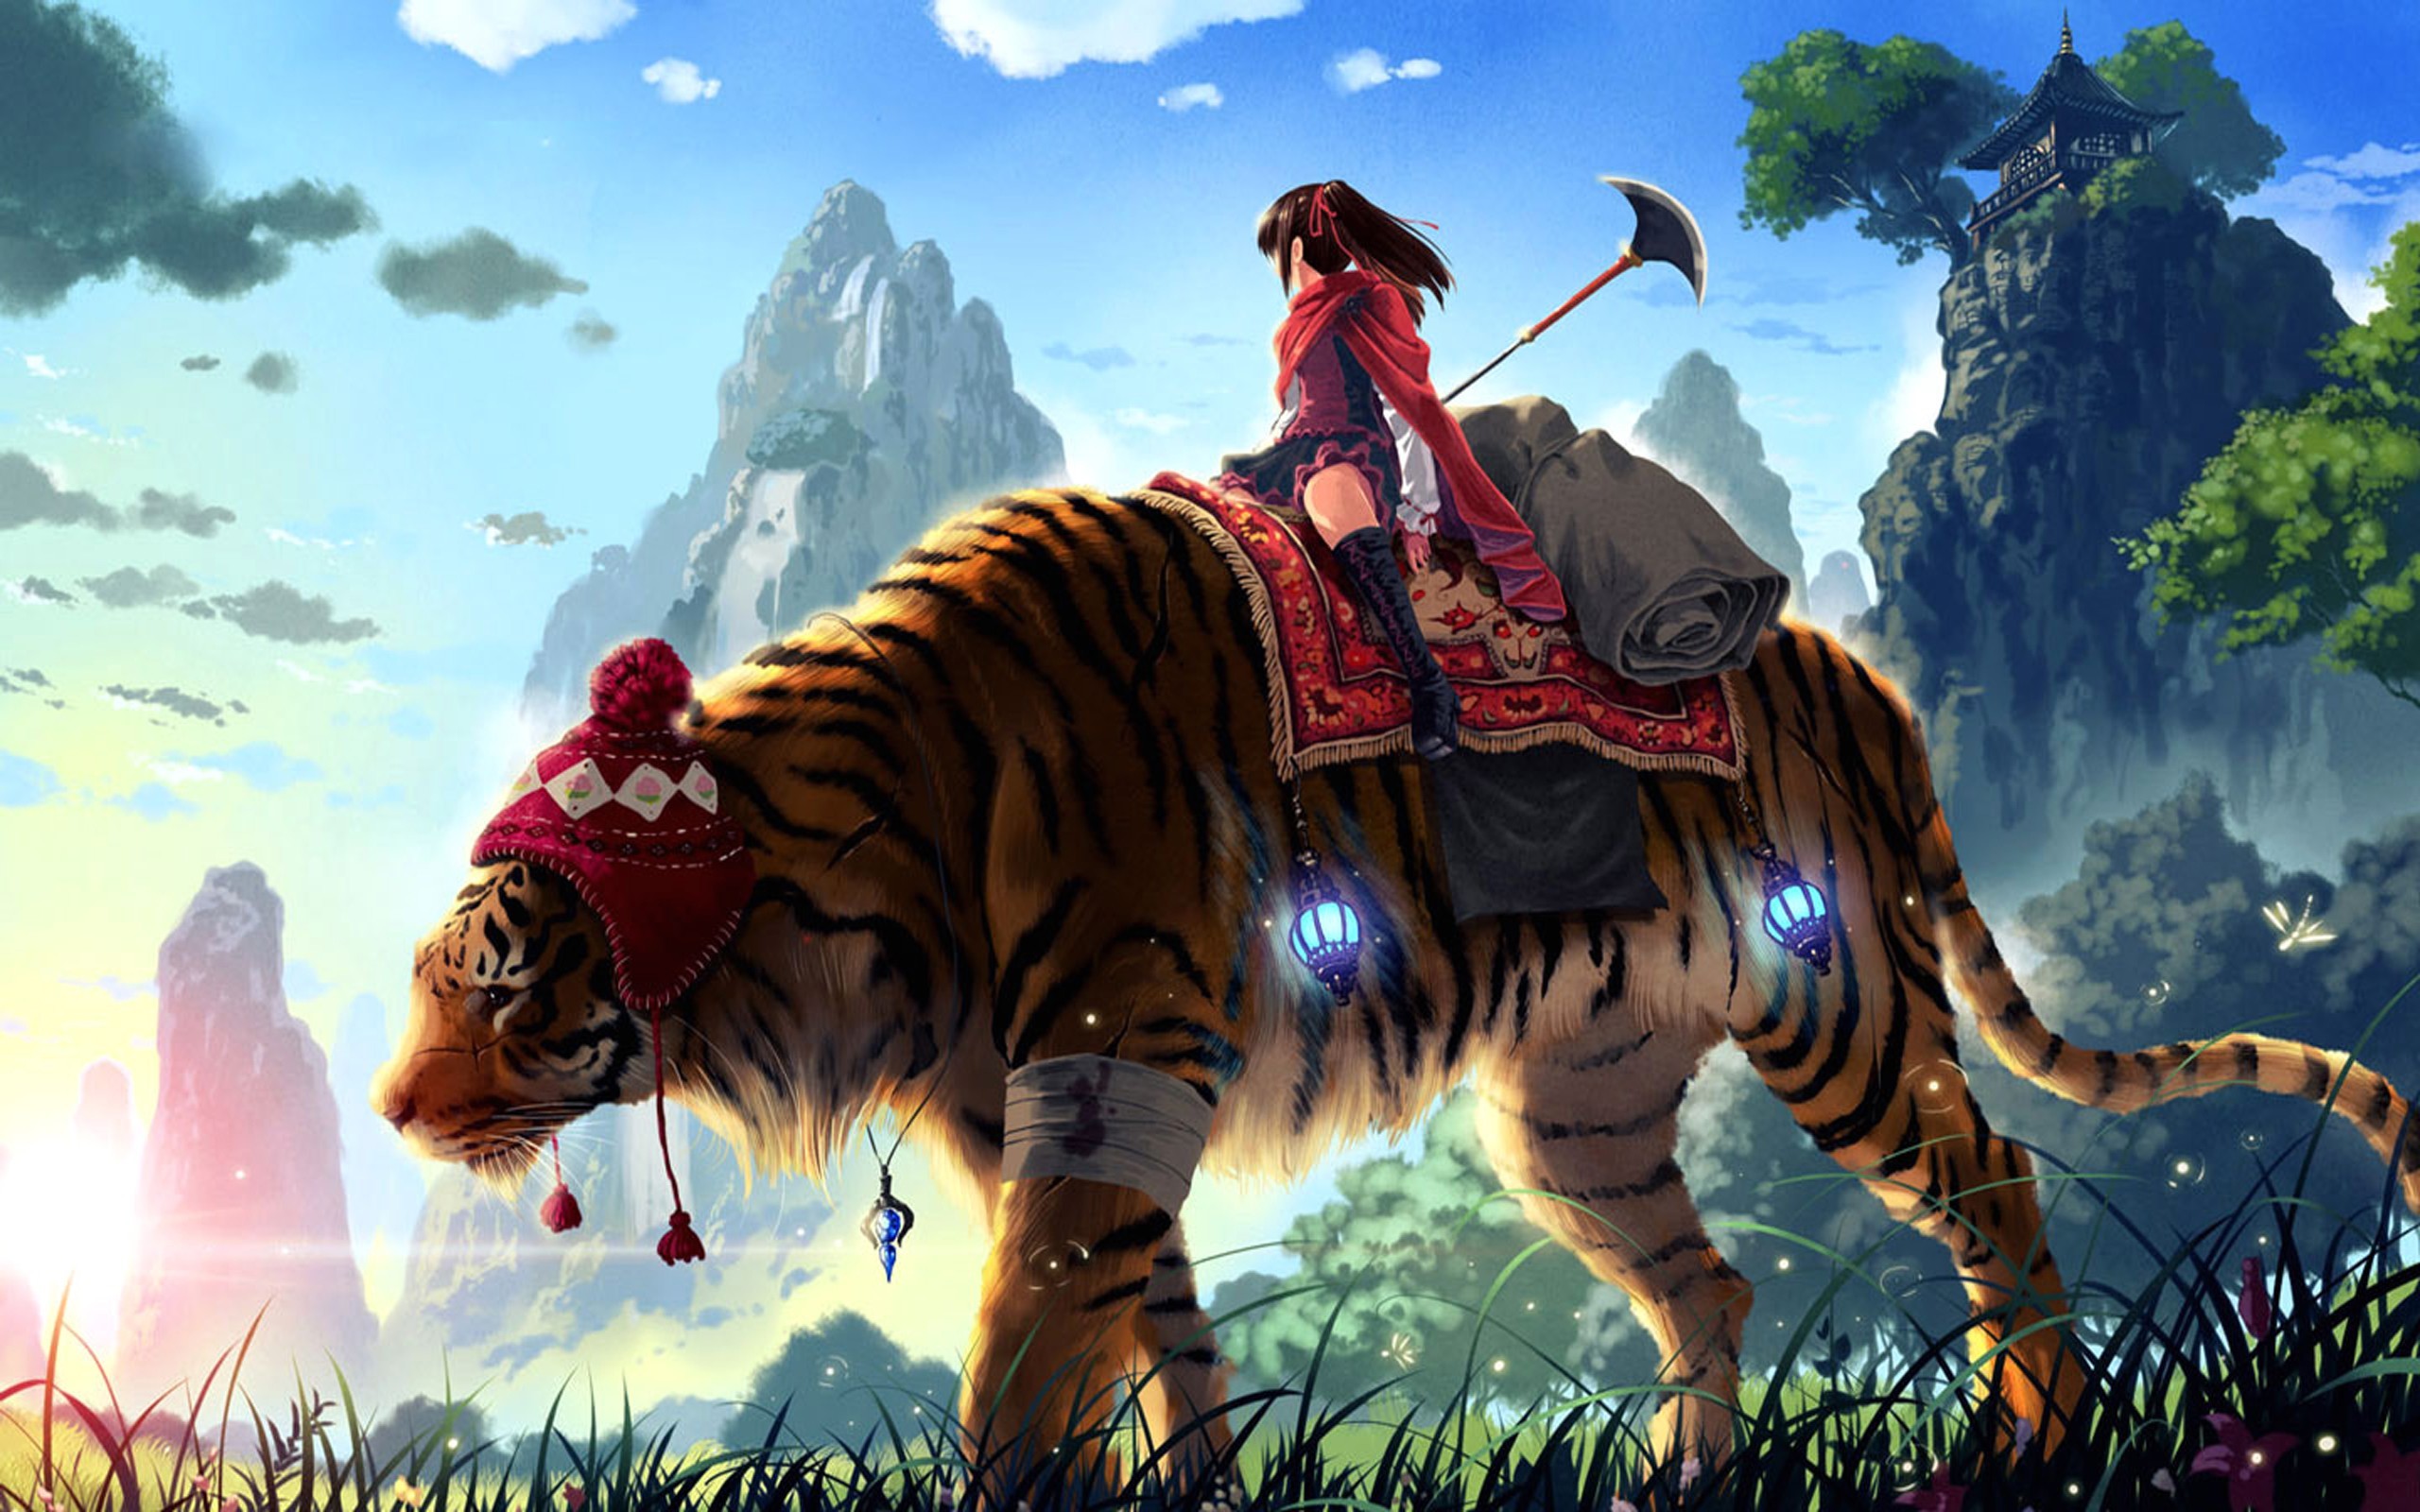 2560x1600 Tigers Wallpaper Fanart Wallpaper from Tigers. Art wallpaper of a girl on a  tiger going through the land.